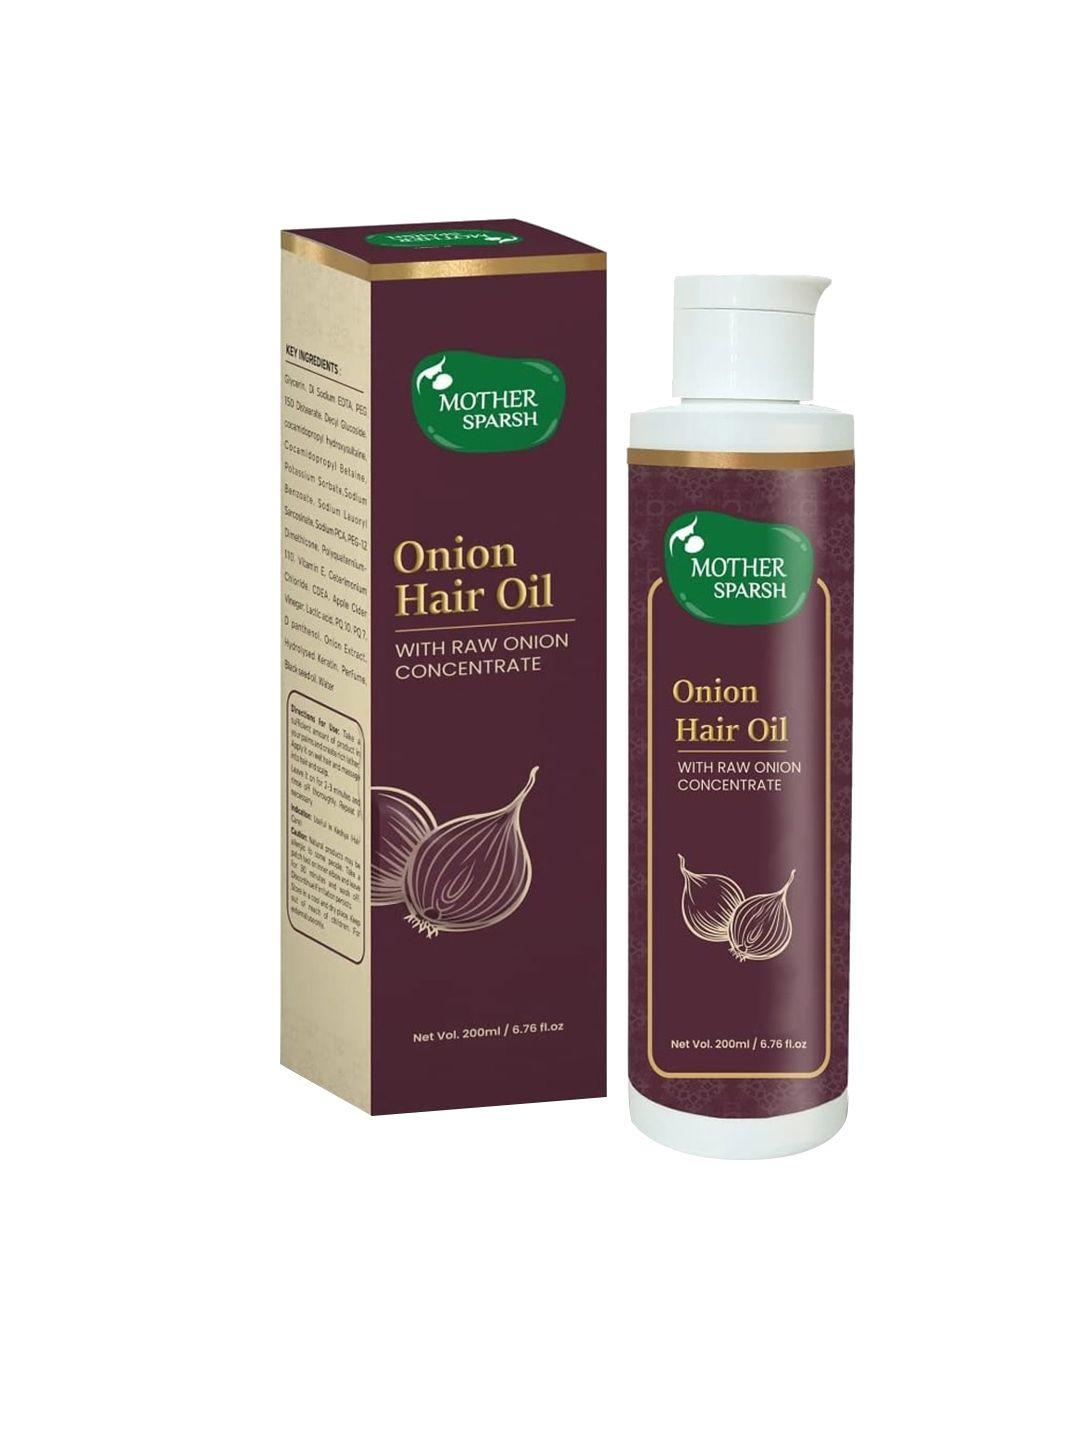 mother sparsh onion hair oil with raw onion concentrate- 200ml